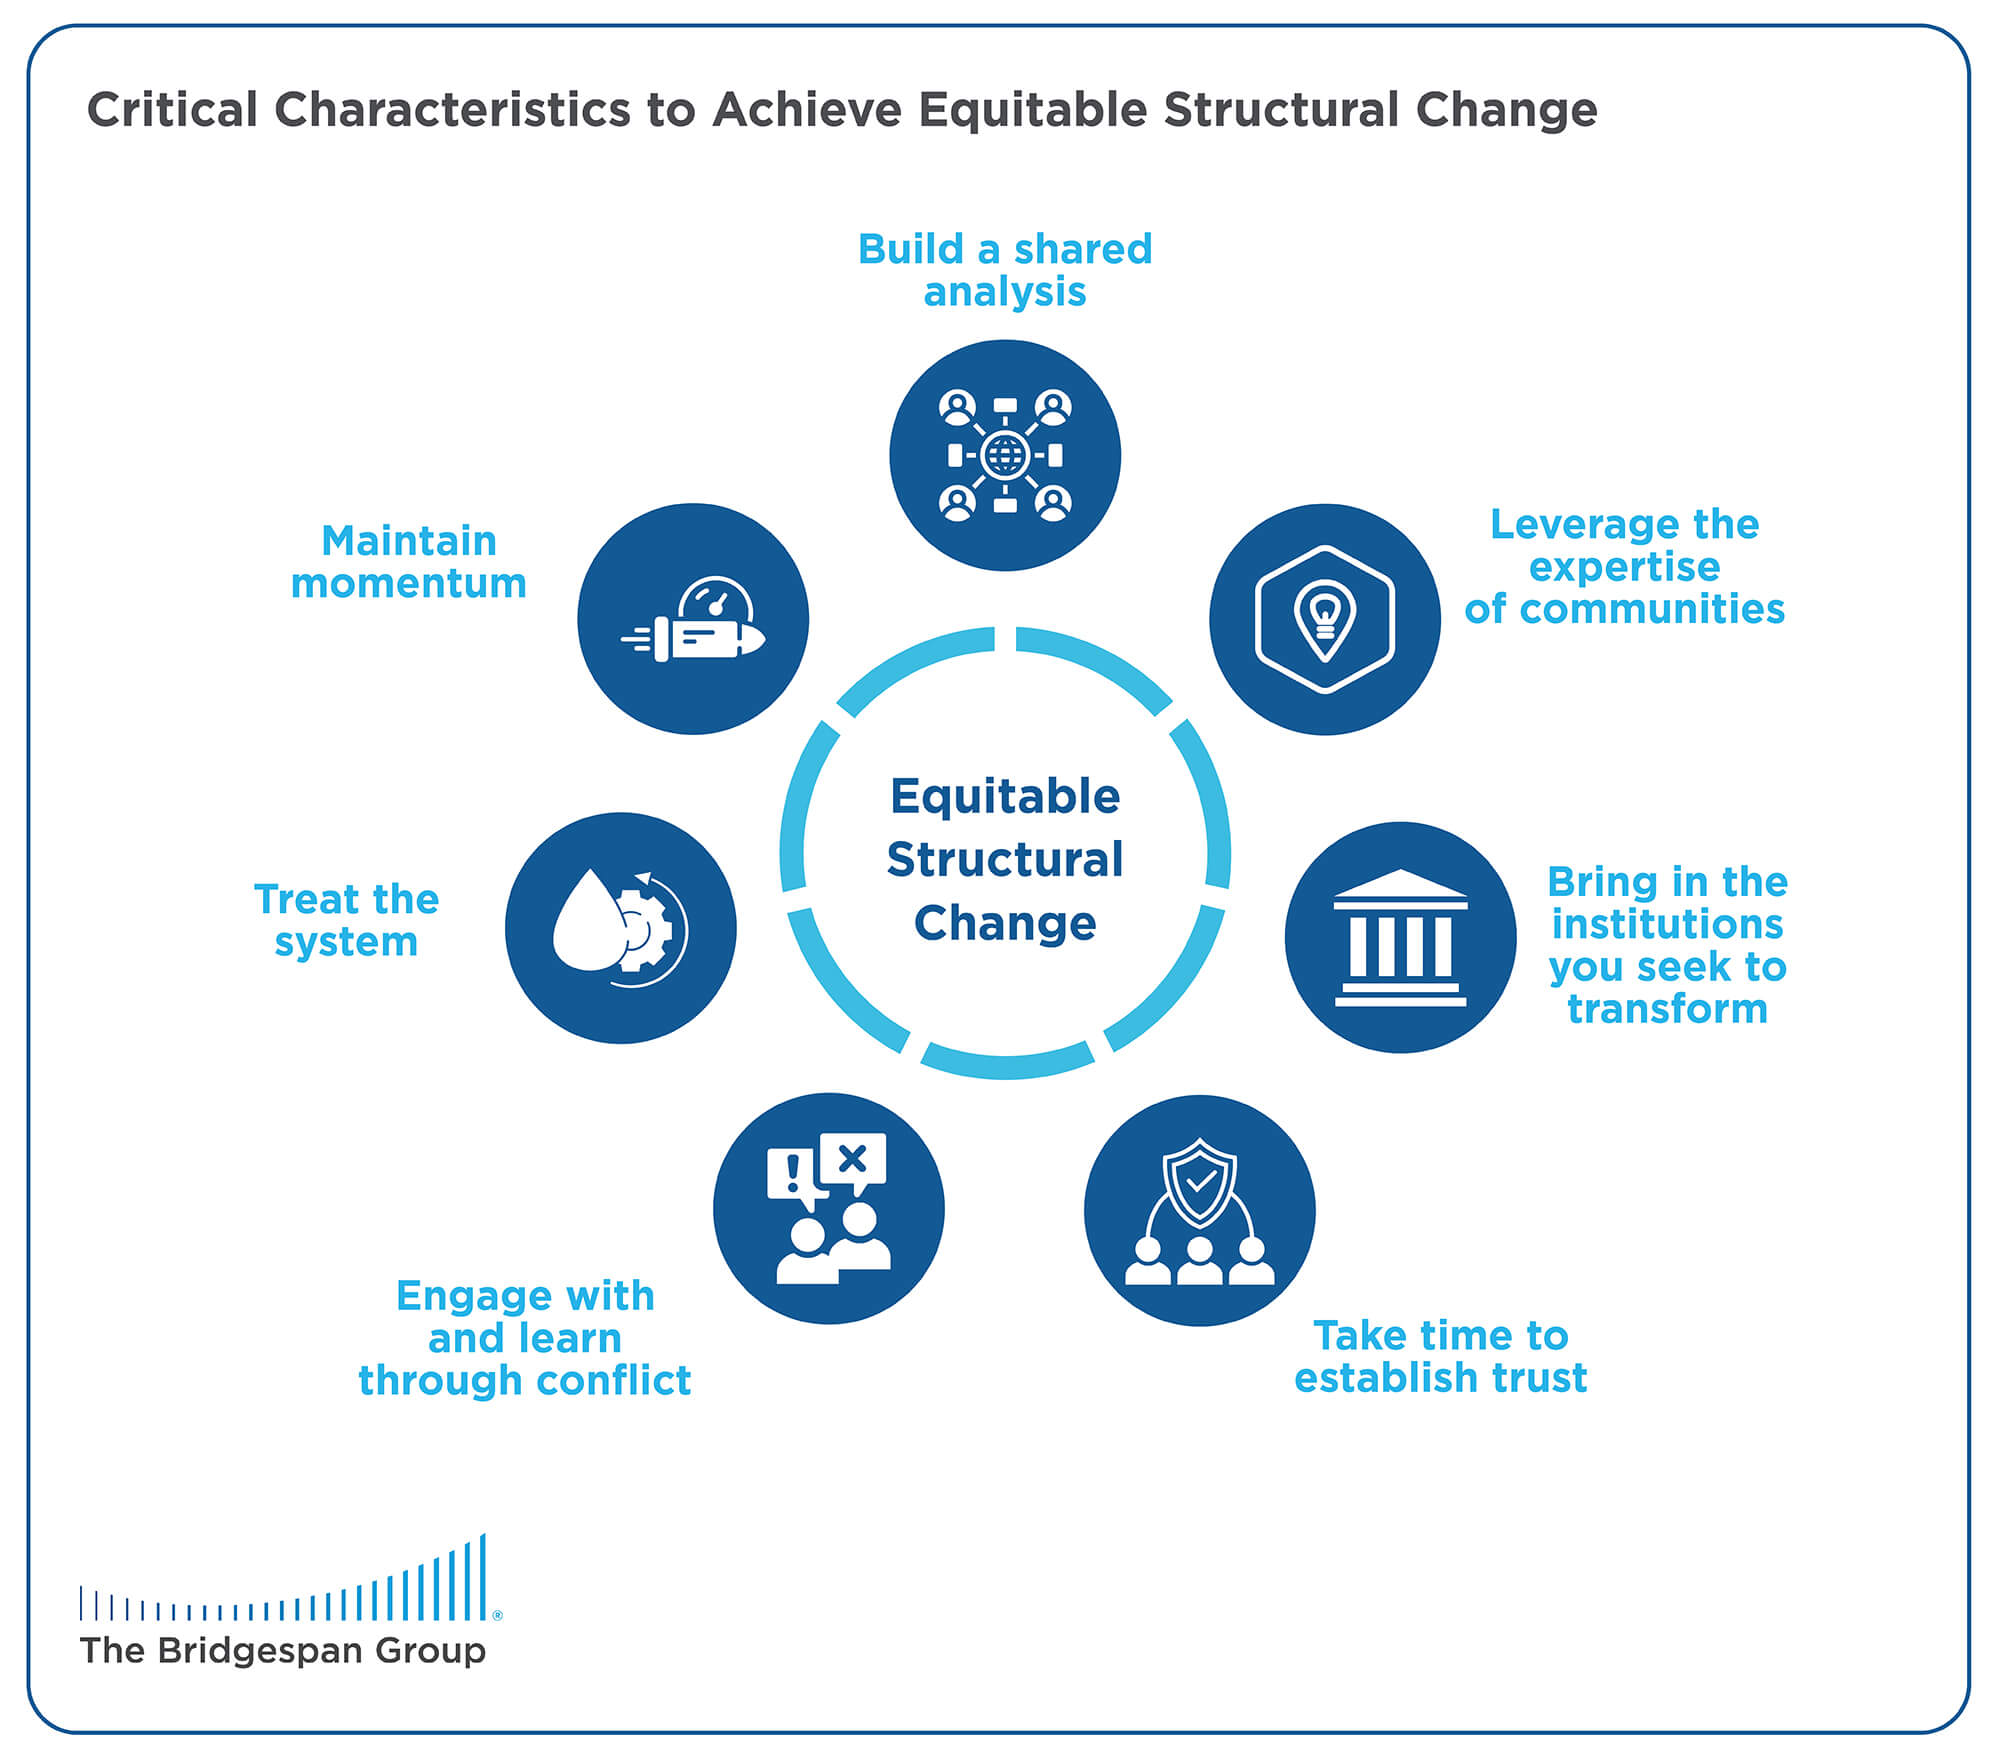 Critical Characteristics to Achieve Equitable Structural Change